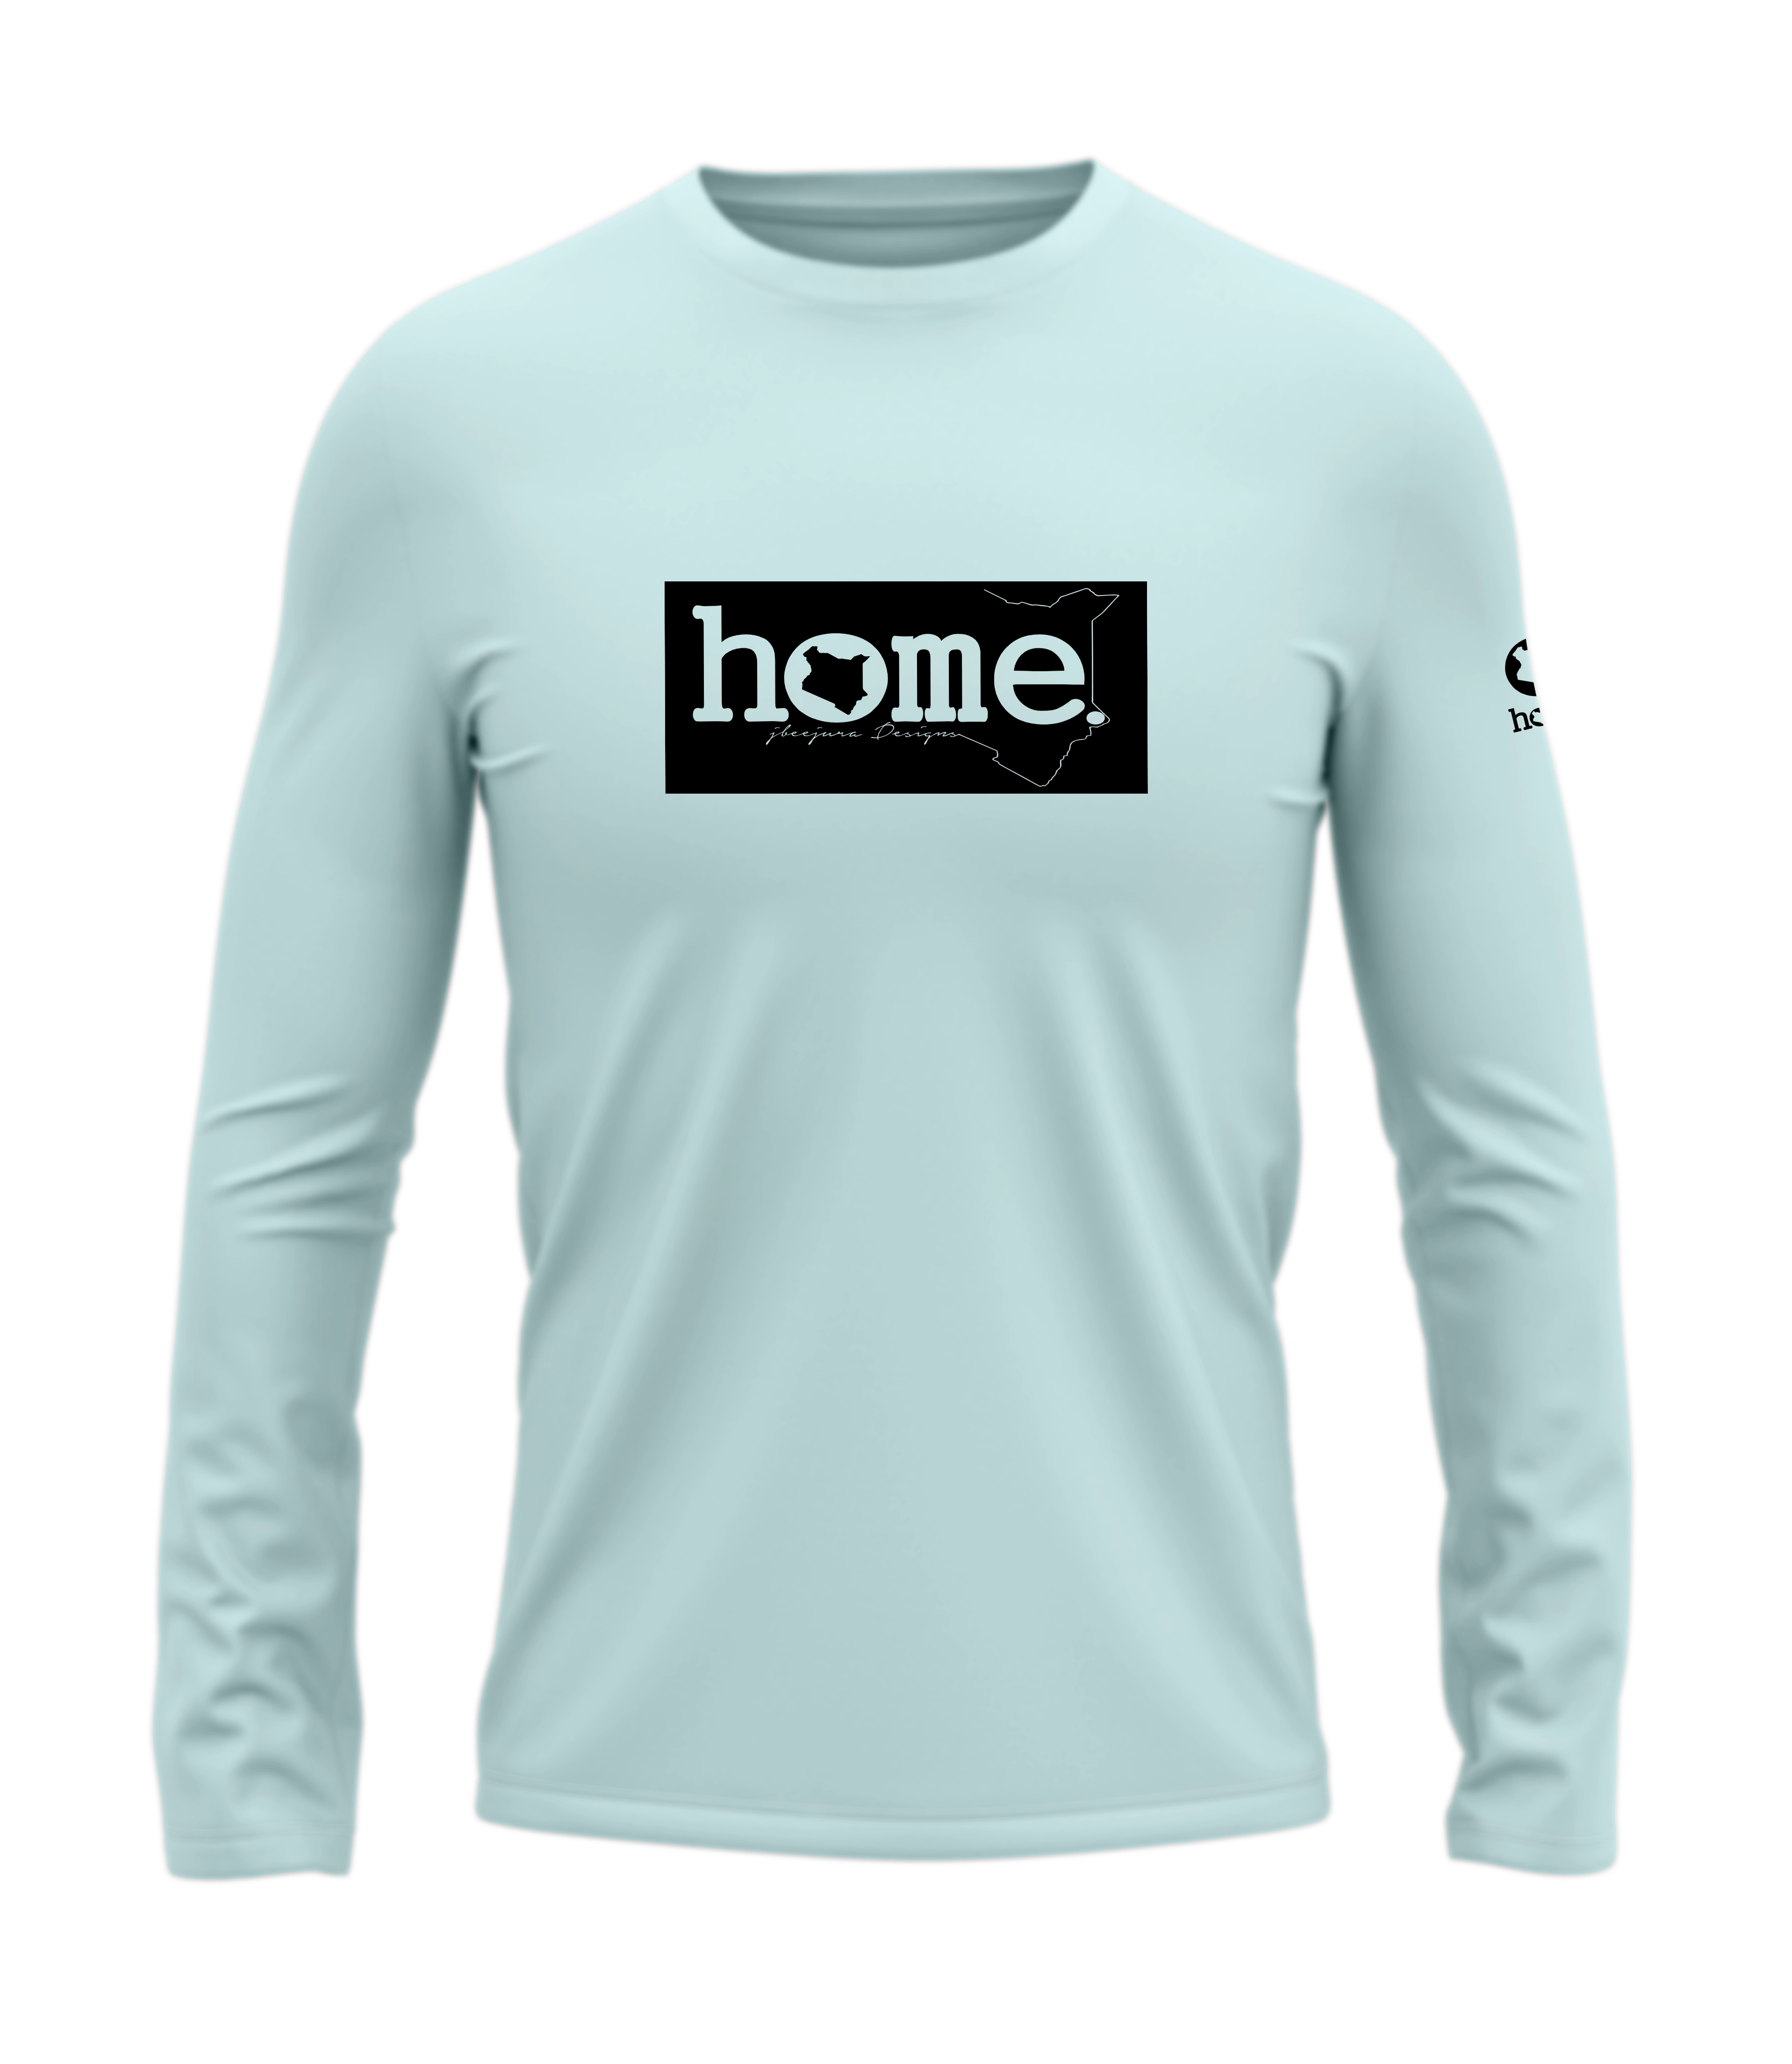 home_254 LONG-SLEEVED MISTY BLUE T-SHIRT WITH A BLACK CLASSIC PRINT – COTTON PLUS FABRIC